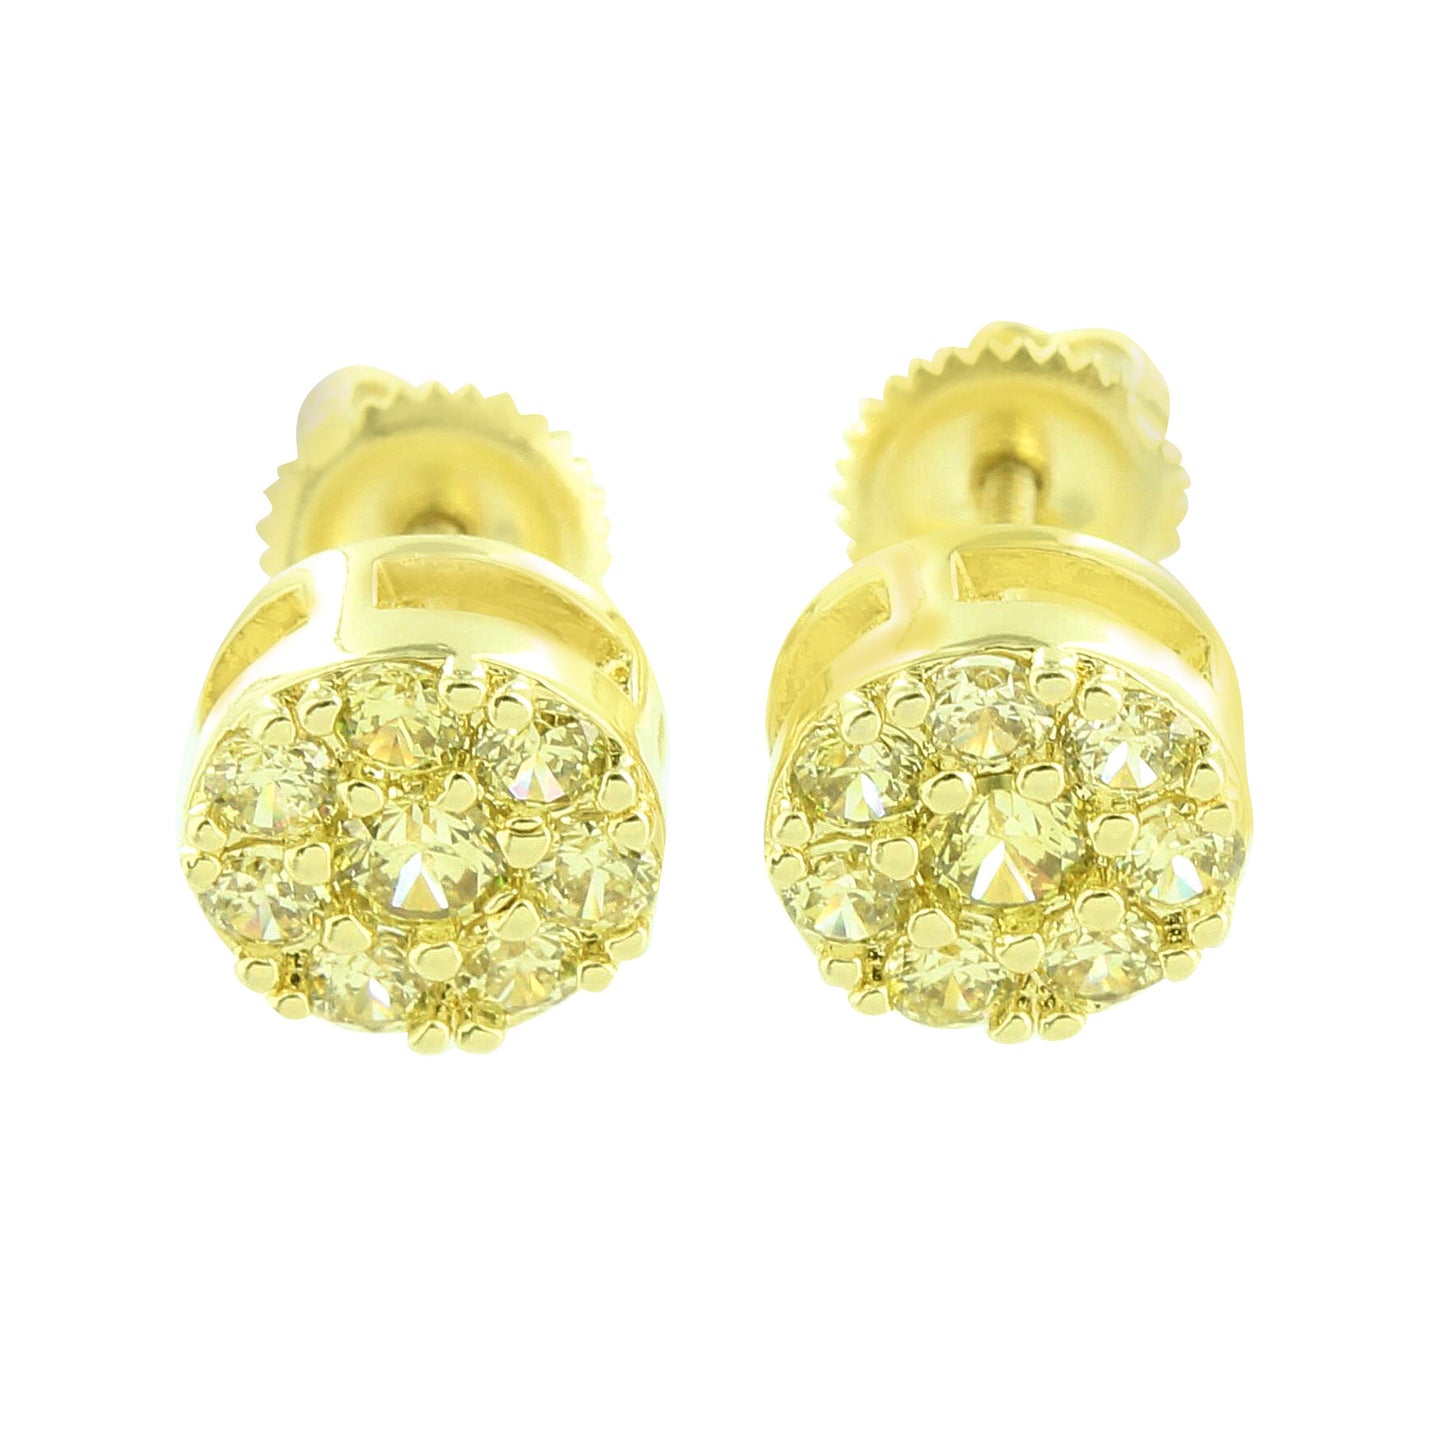 Cluster Set Round Earrings Canary Lab Diamond Screw Back 14k Yellow Gold Finish